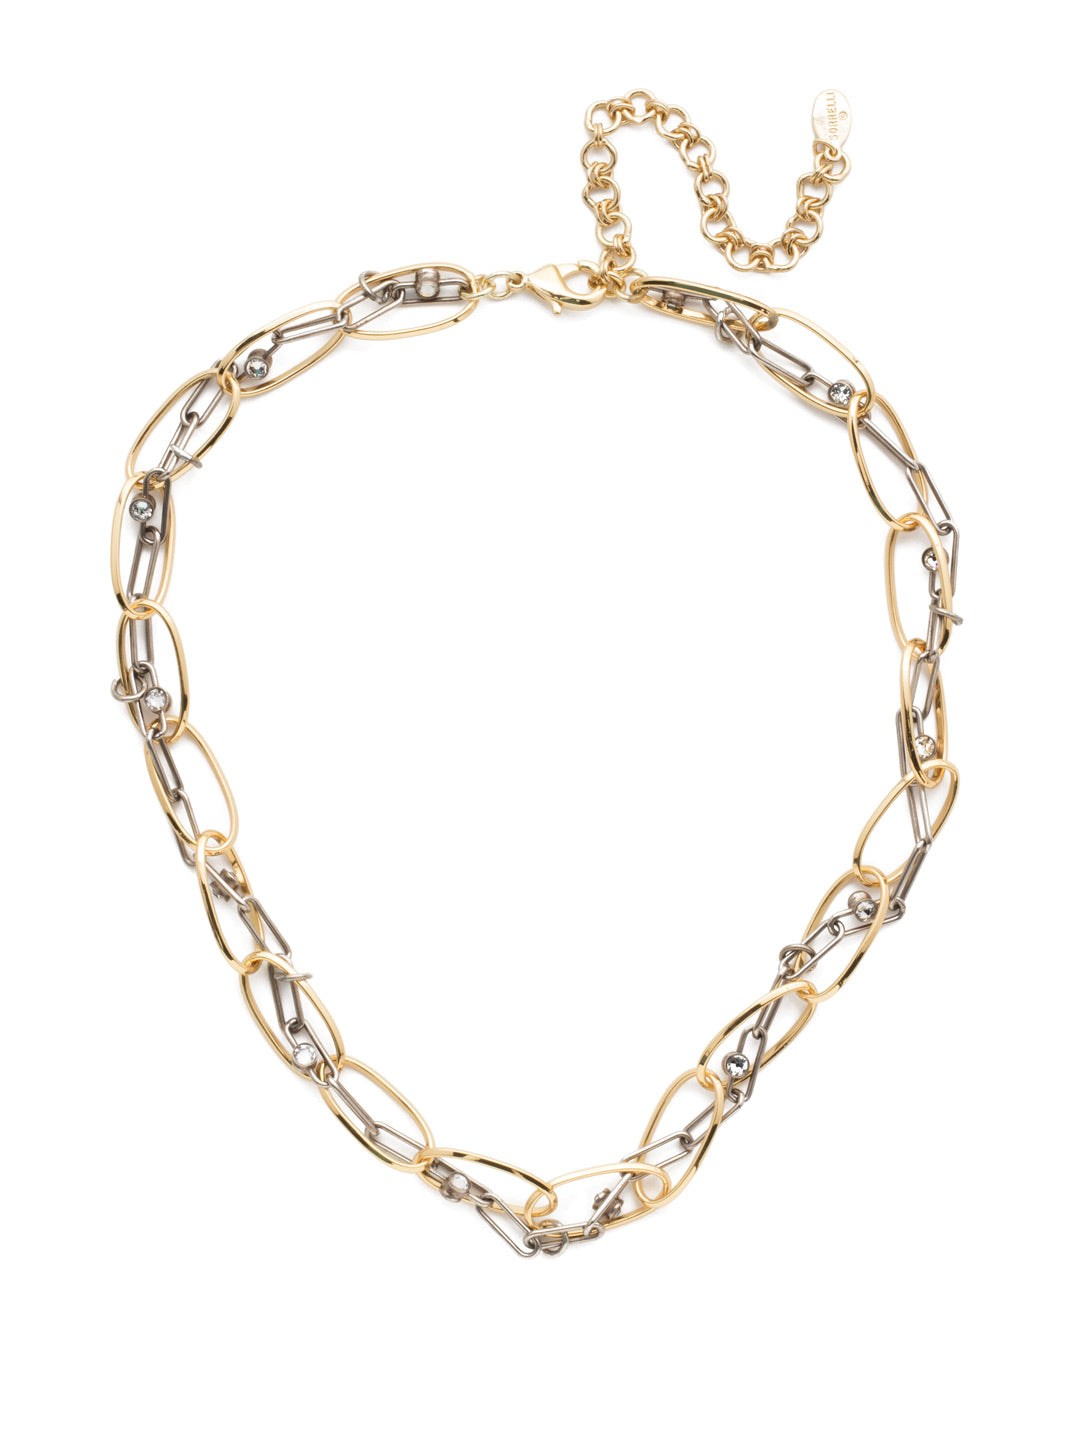 Sahara Tennis Necklace - 4NET10MXCRY - <p>Get a multifaceted look in one piece with the Sahara Layered Tennis Necklace. Two sets of airy metal links intertwine with a bit of sparkling crystals thrown into the mix. From Sorrelli's Crystal collection in our Mixed Metal finish.</p>